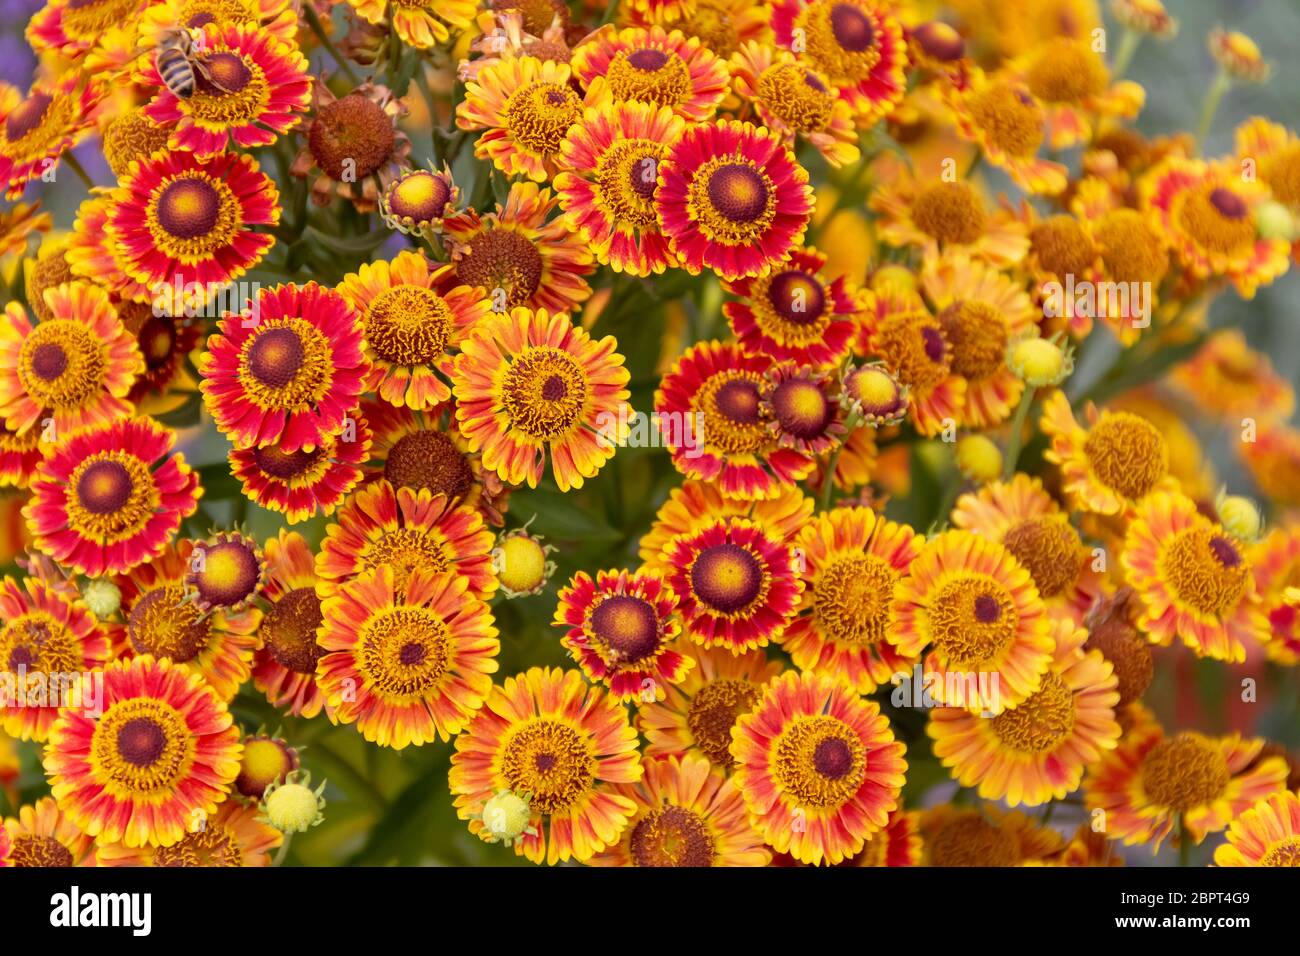 closeup shot showing lots of colorful aster flowers Stock Photo